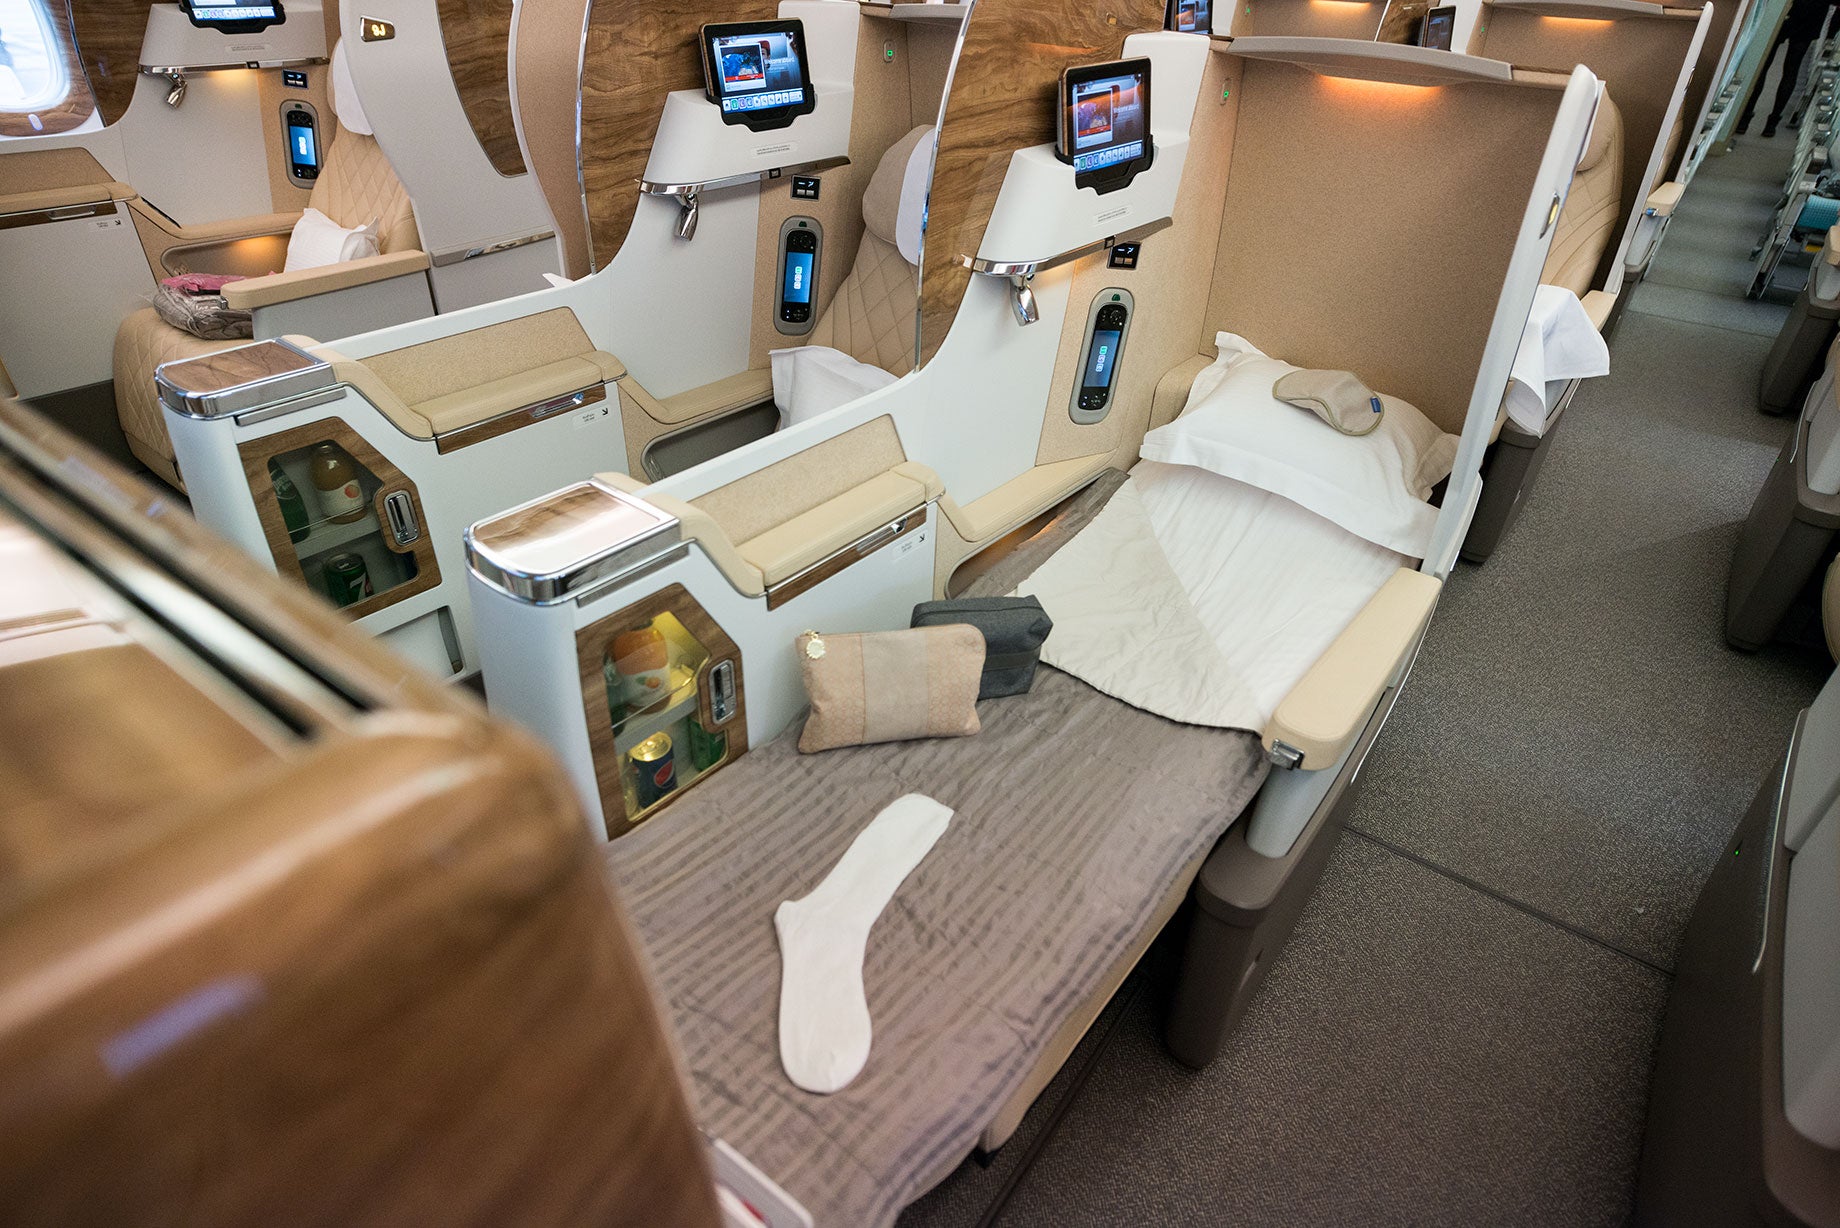 Emirates passenger awarded £6,870 in compensation after business class